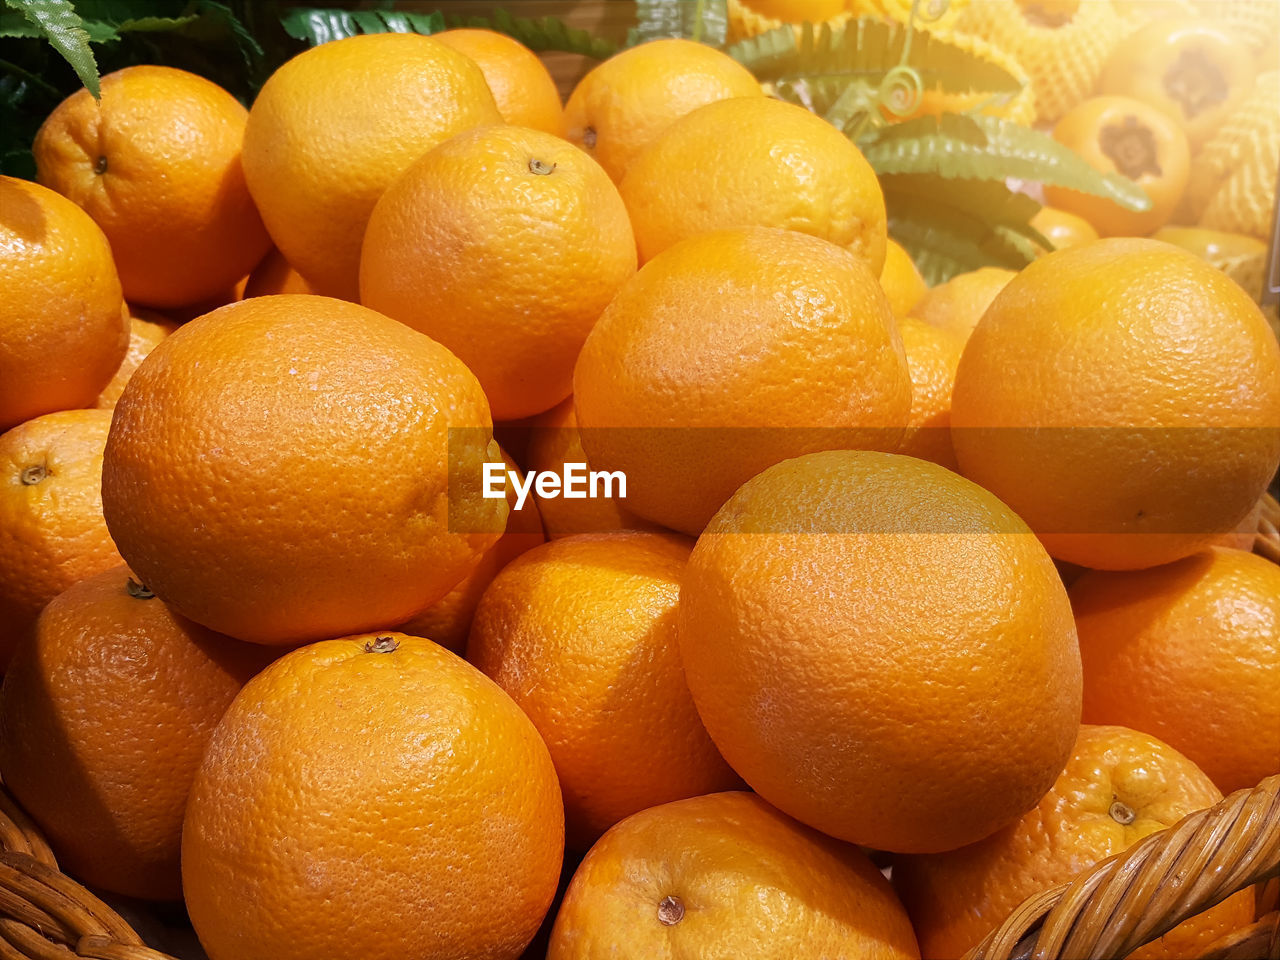 CLOSE-UP OF ORANGES AT MARKET STALL